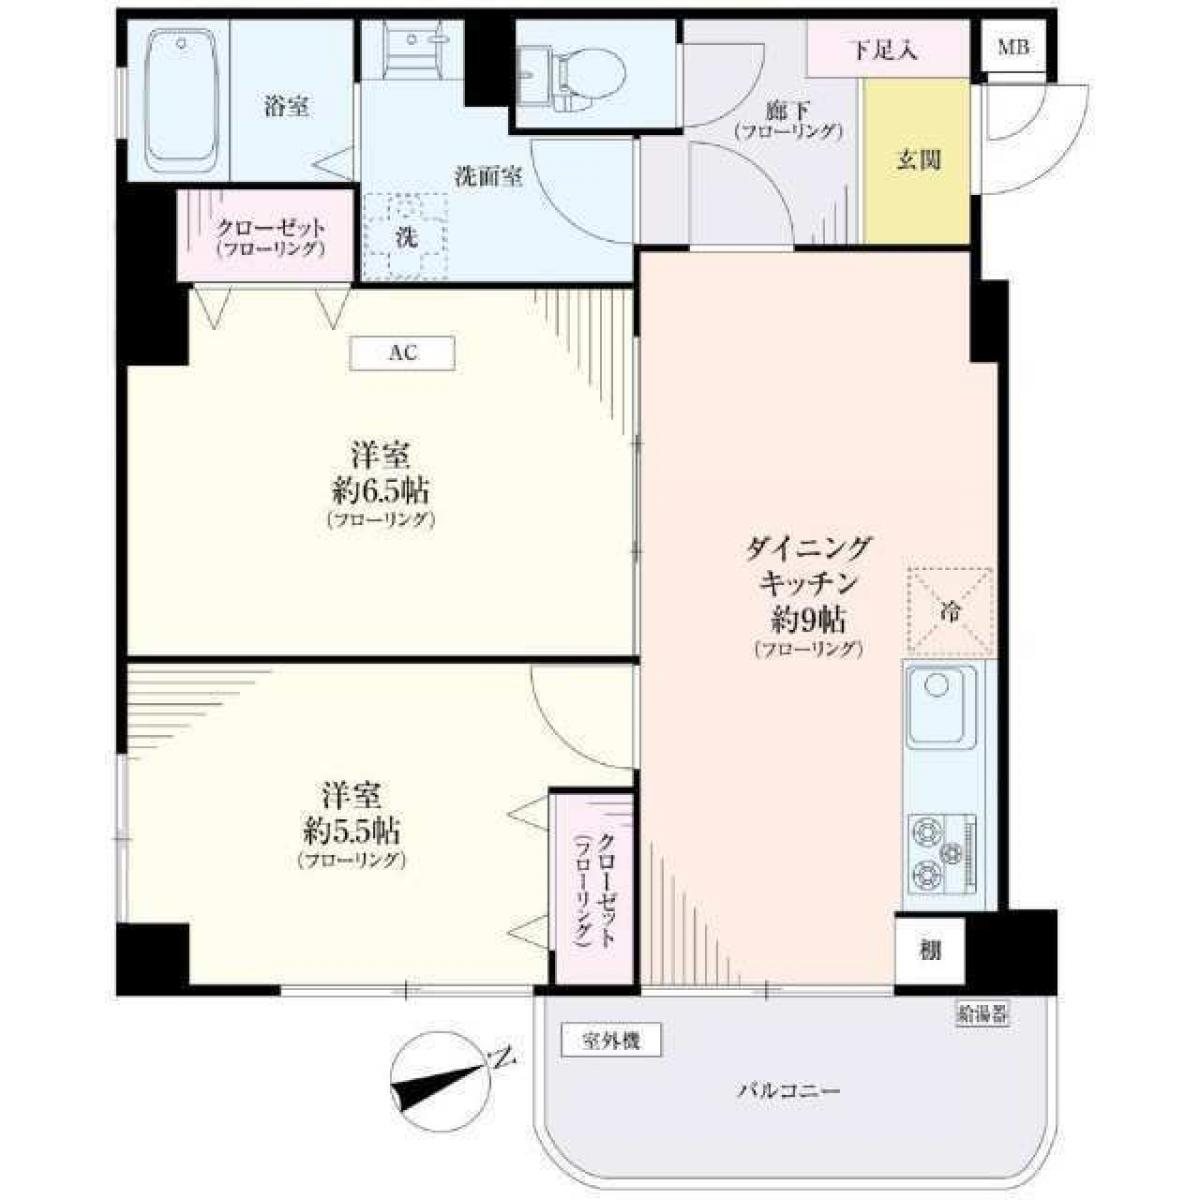 Picture of Apartment For Sale in Nishitokyo Shi, Tokyo, Japan